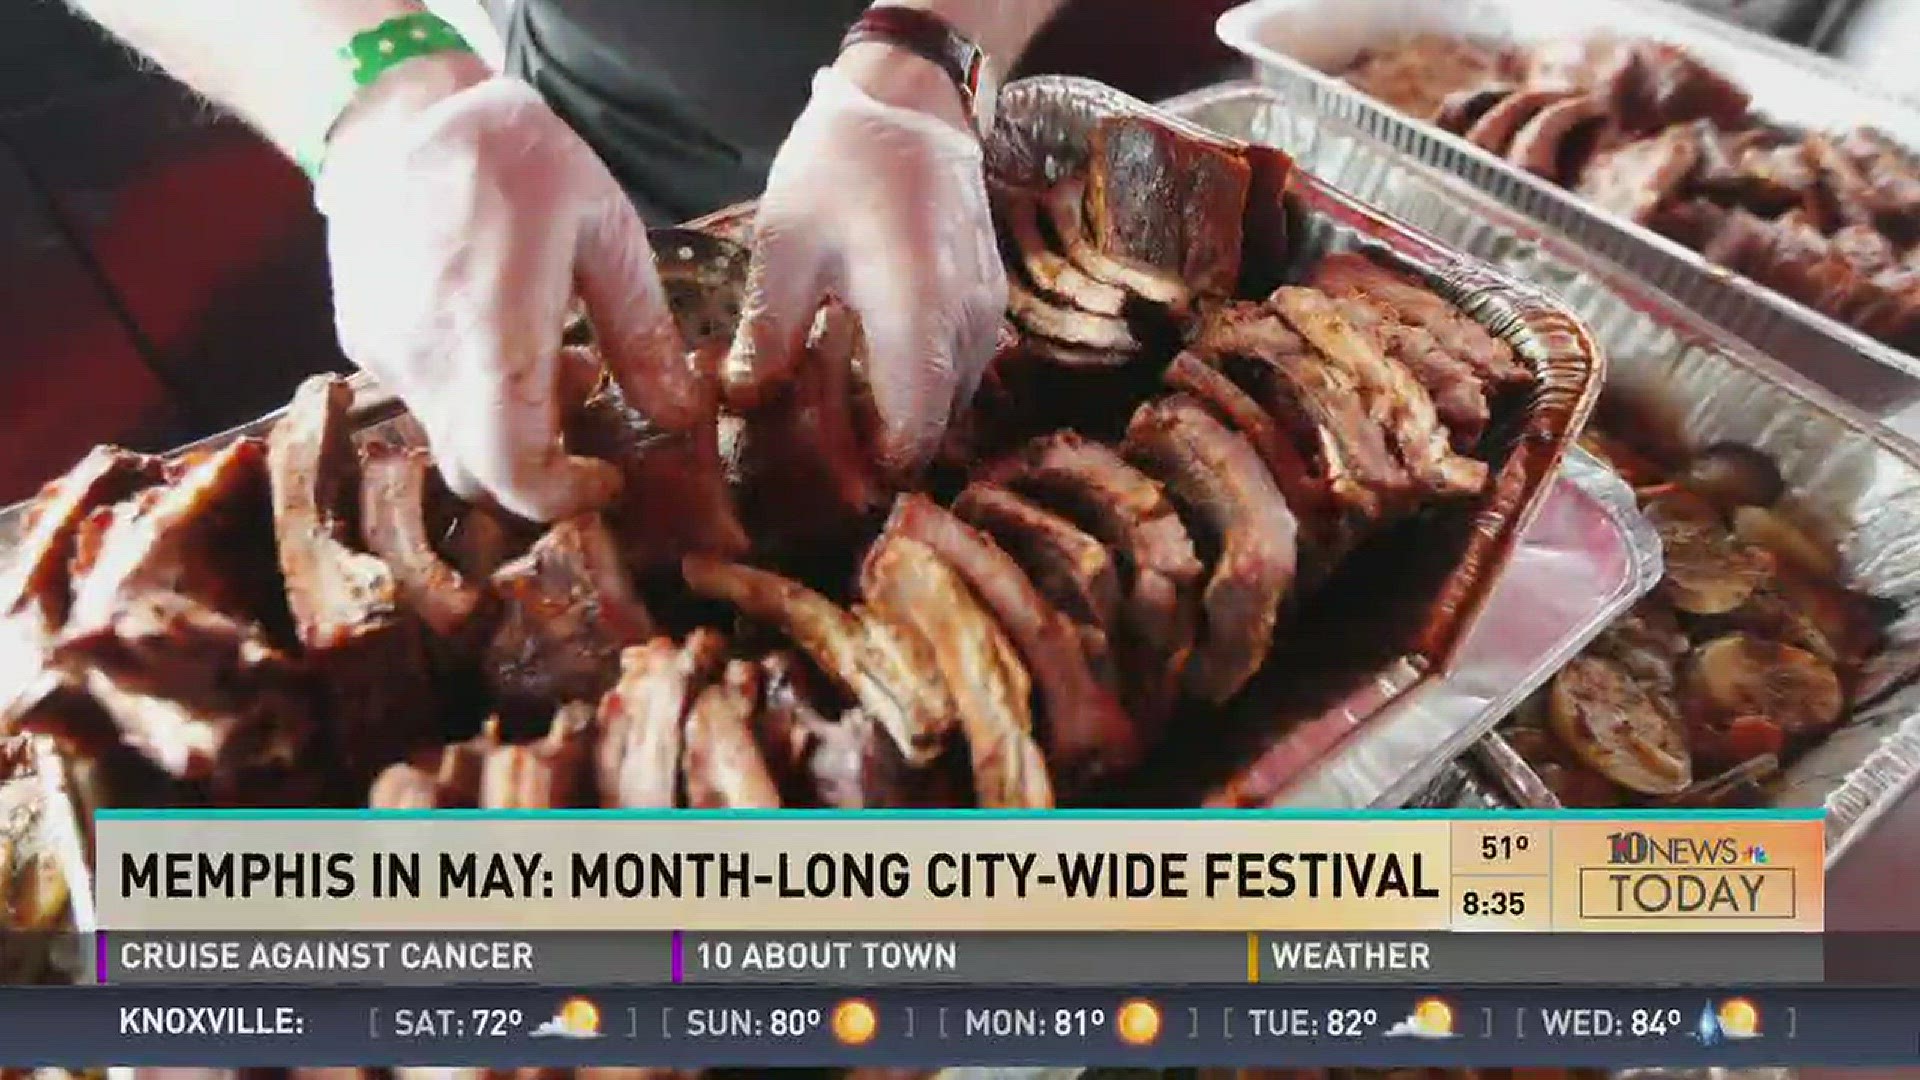 Dave Jones takes us to Memphis for the month of May. Festivals celebrating music and bbq included.